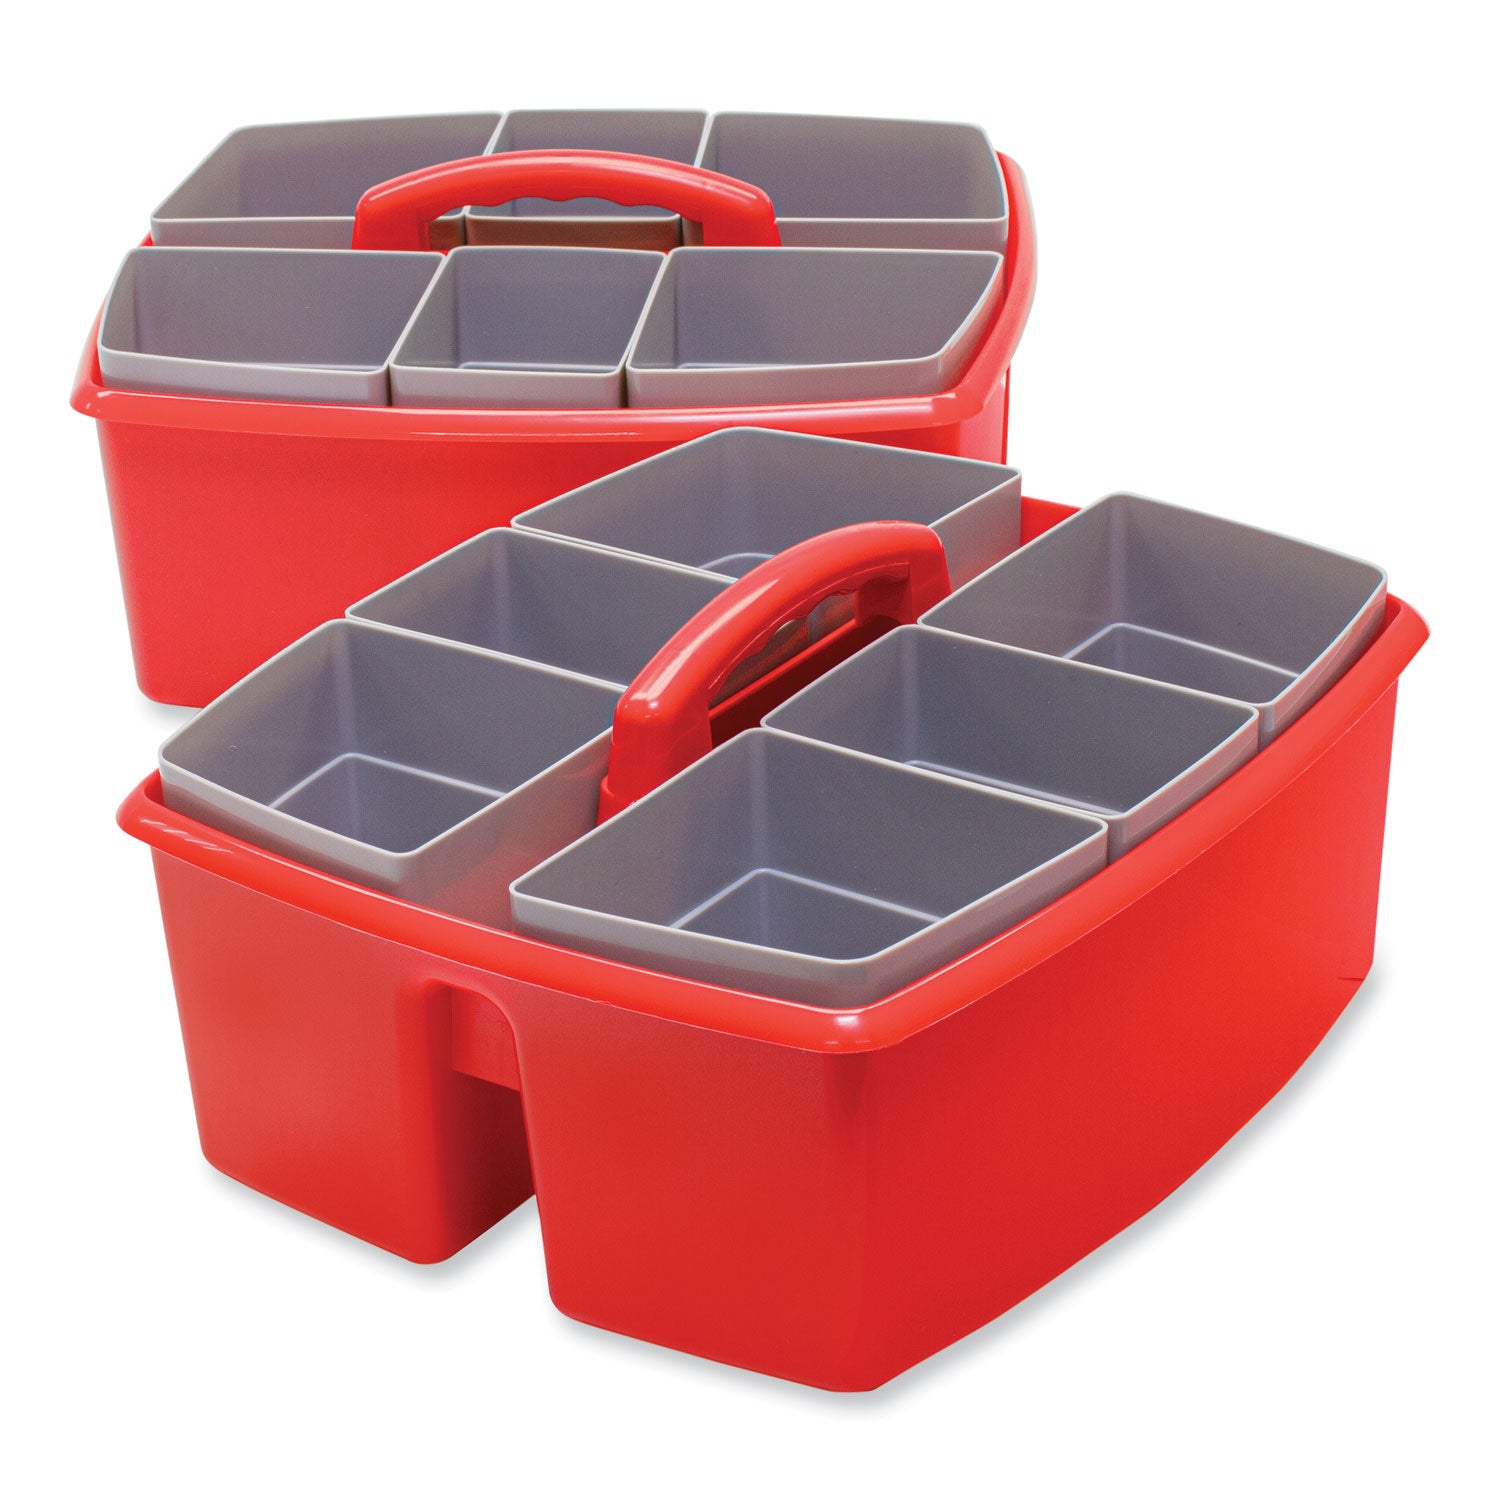 large-caddy-with-sorting-cups-red-2-carton_stx00981u02c - 2